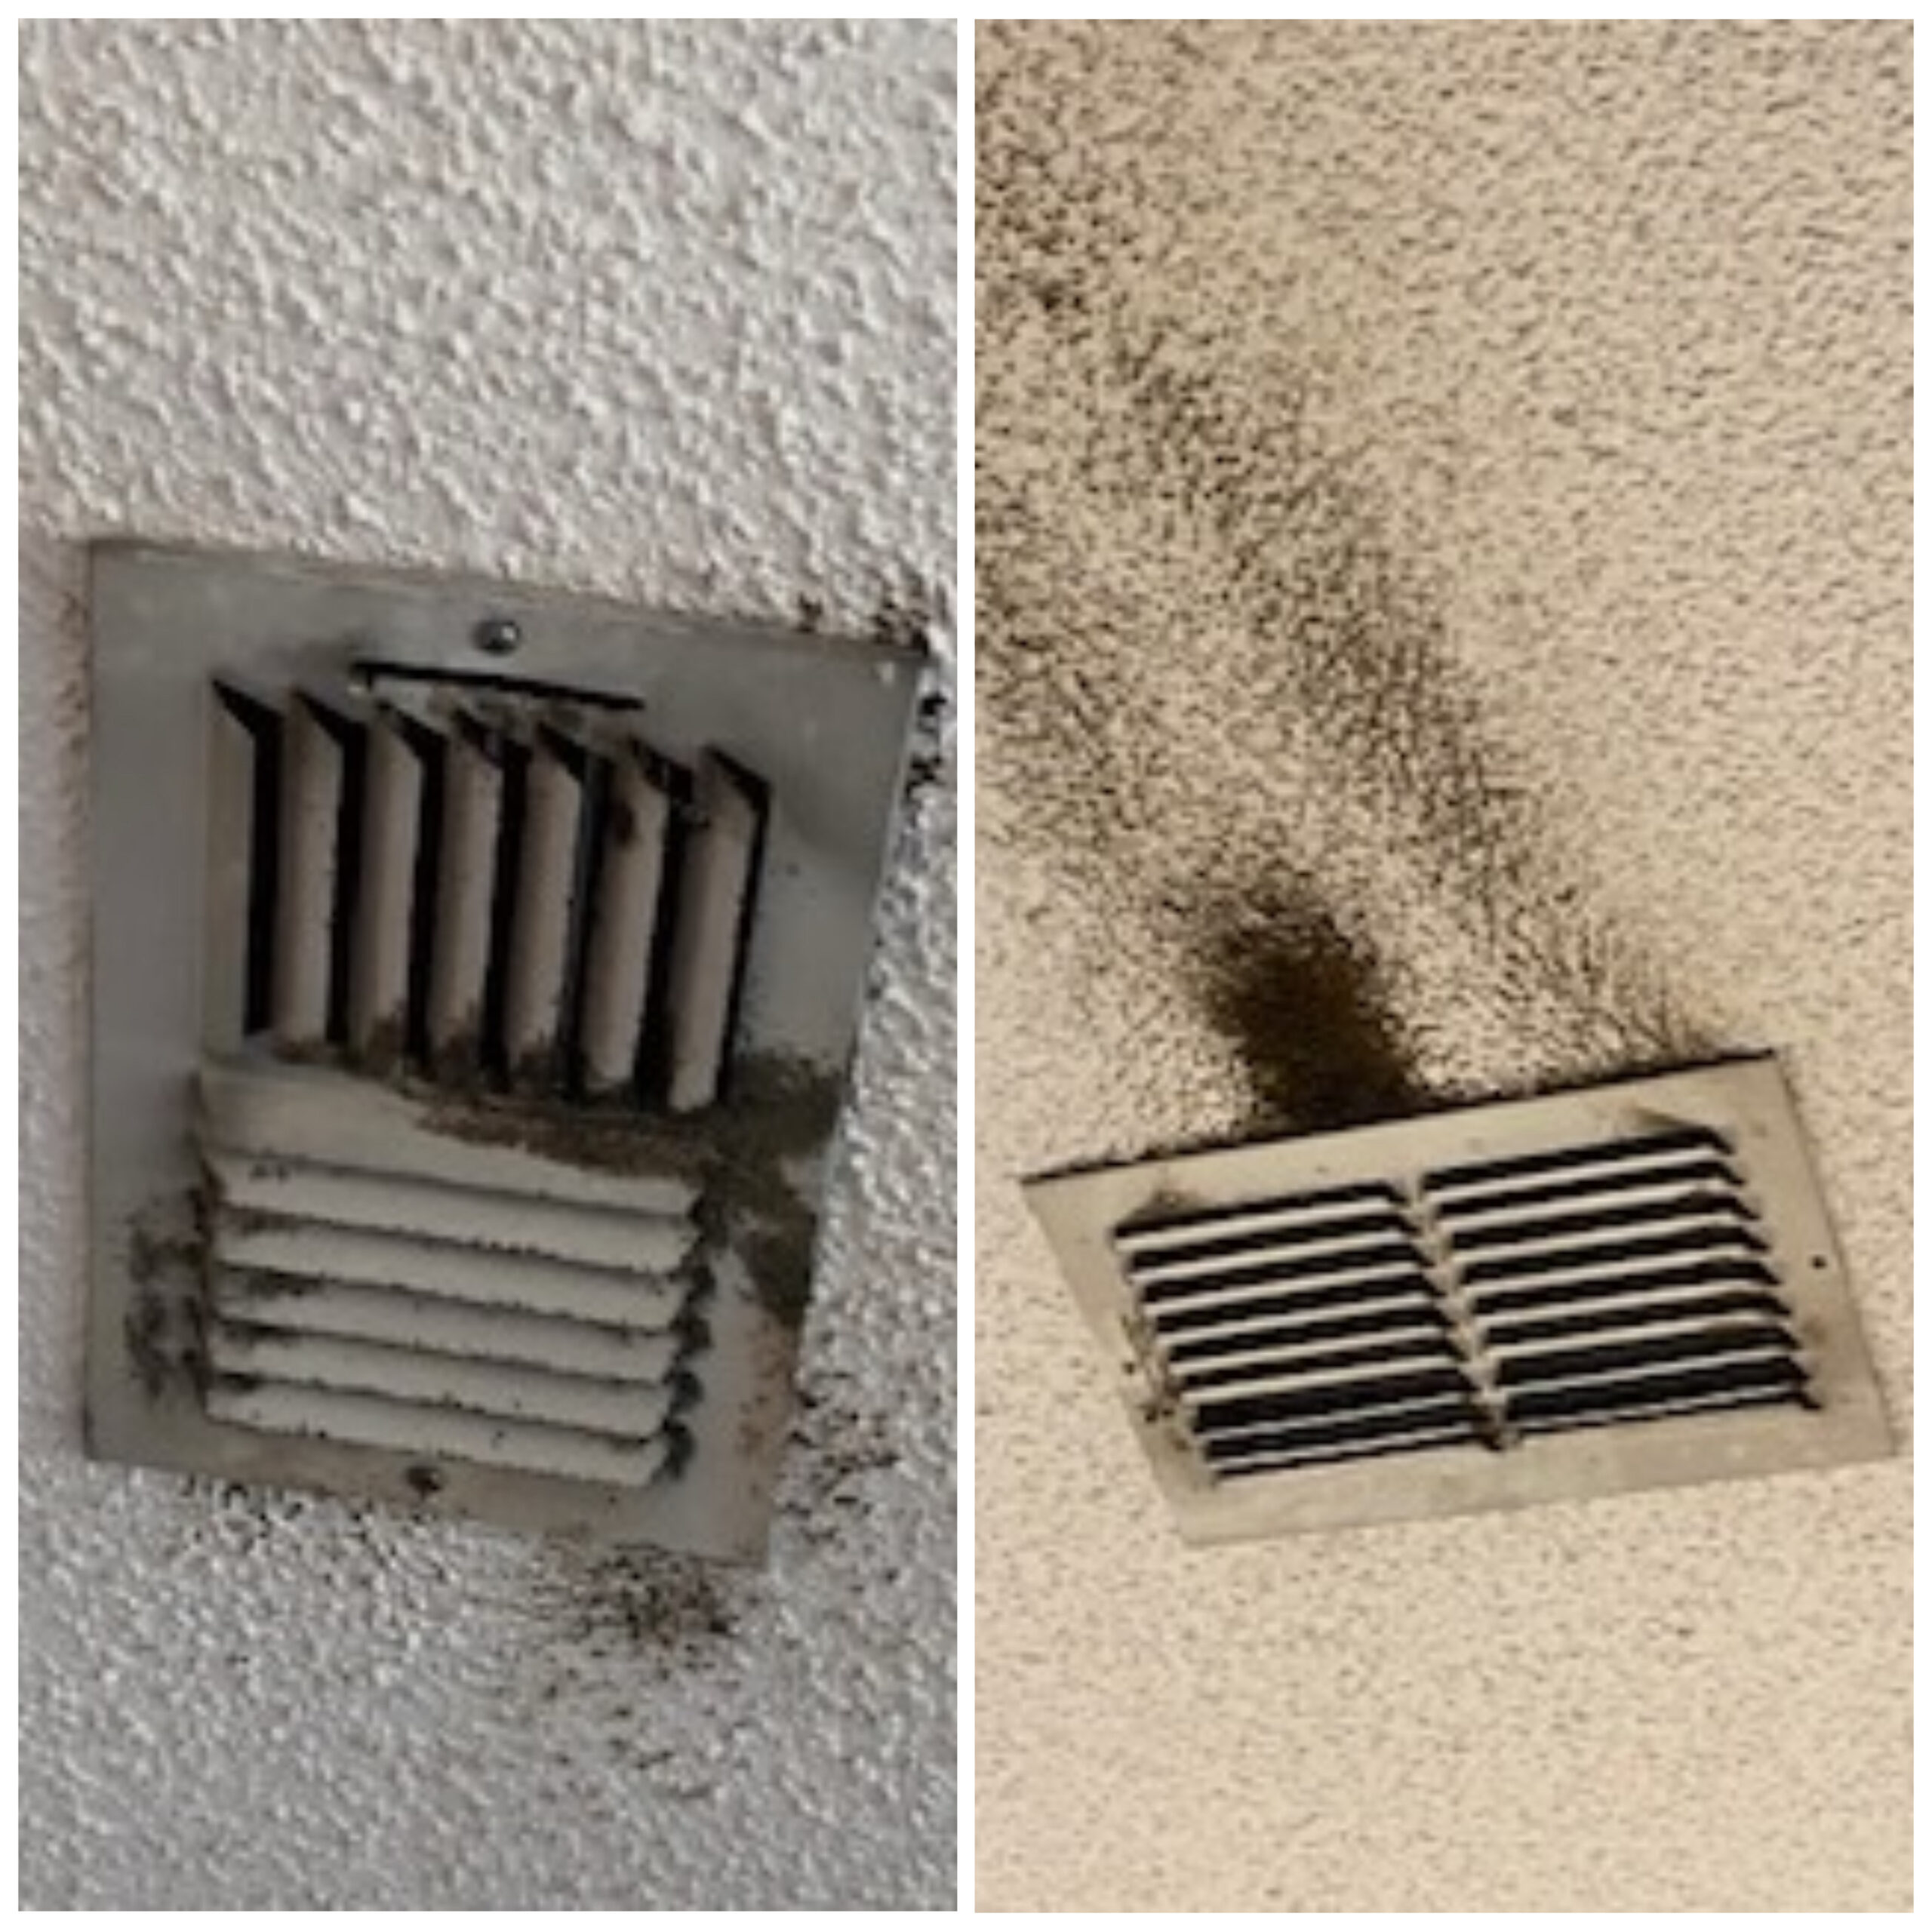 Black Spots On Vent Might Be Mold Mr Duct Cleaner